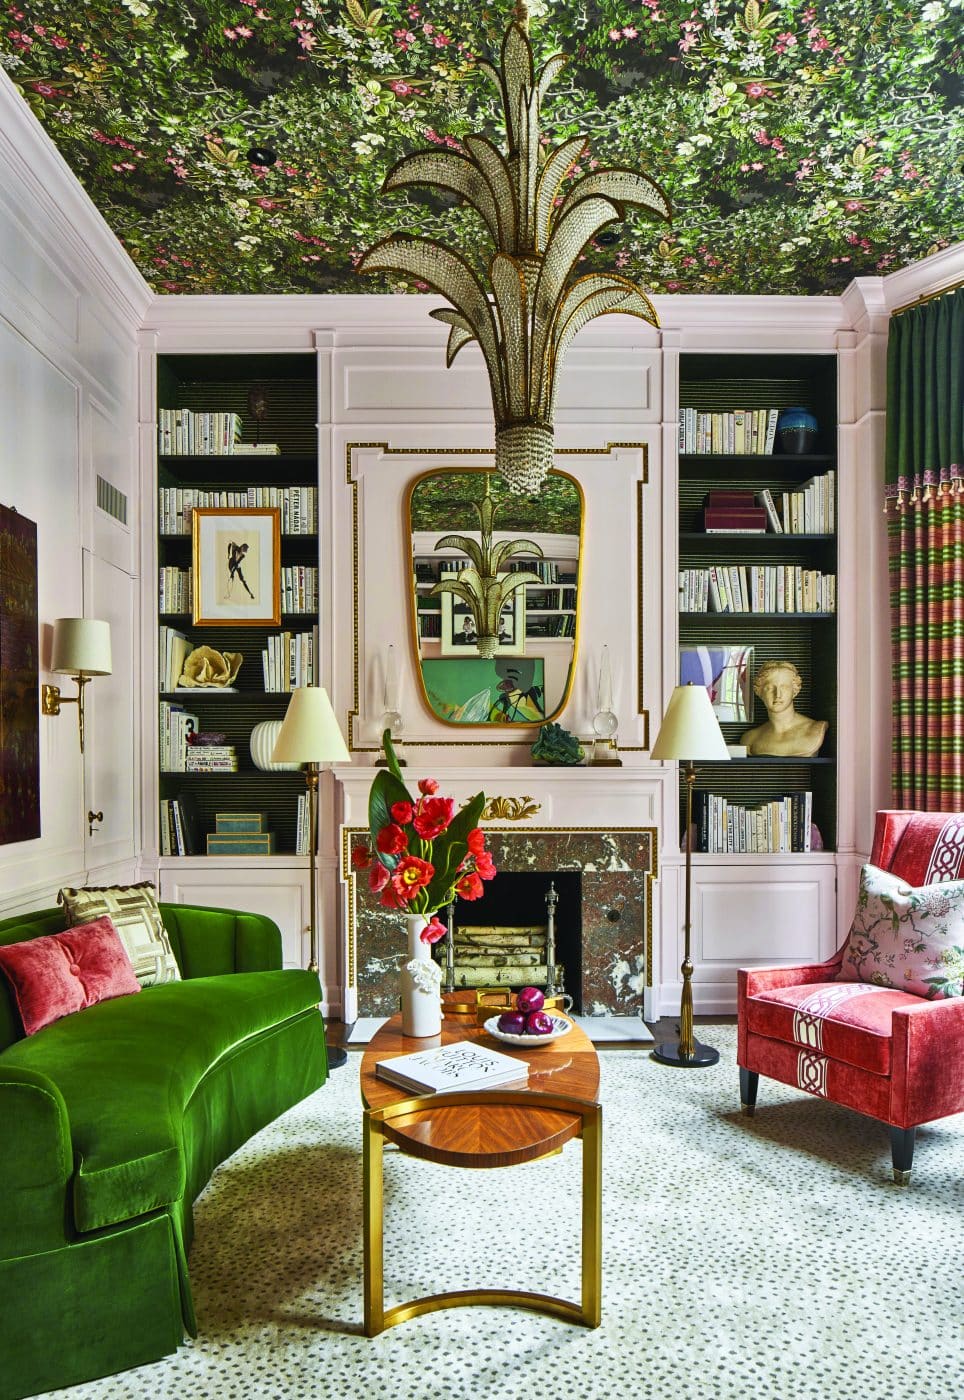 Corey Damen Jenkins ladies' library at Kips Bay Decorator Show House in New York in 2019 with jungle wallpaper ceiling, pink walls, pink and green furniture, marble fireplace